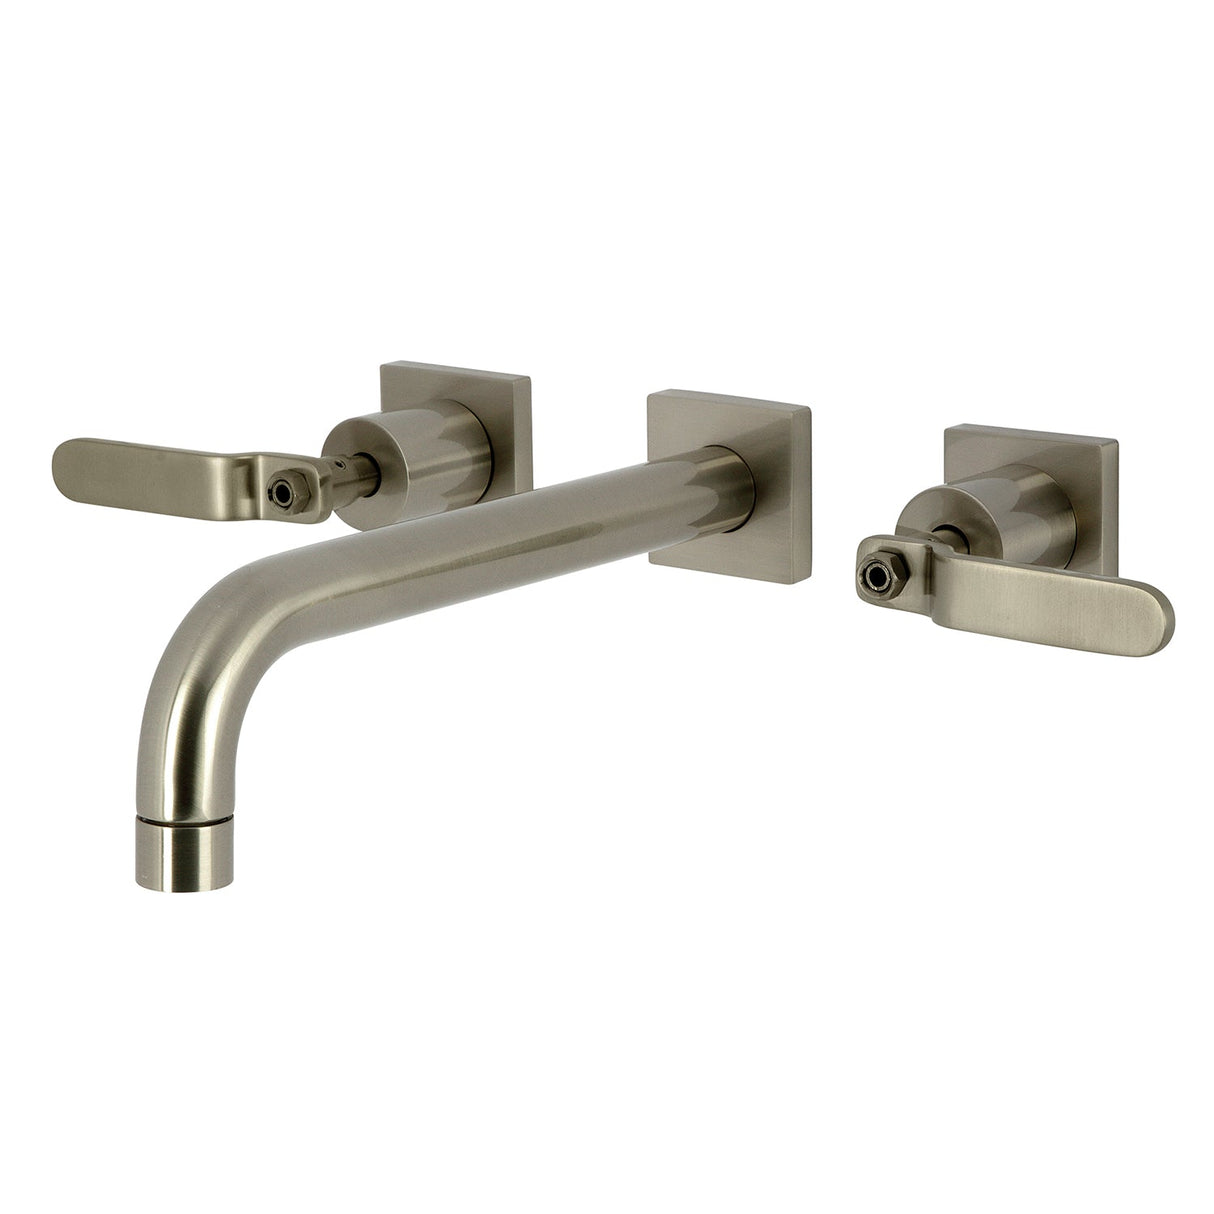 Whitaker KS6028KL Two-Handle 3-Hole Wall Mount Roman Tub Faucet, Brushed Nickel